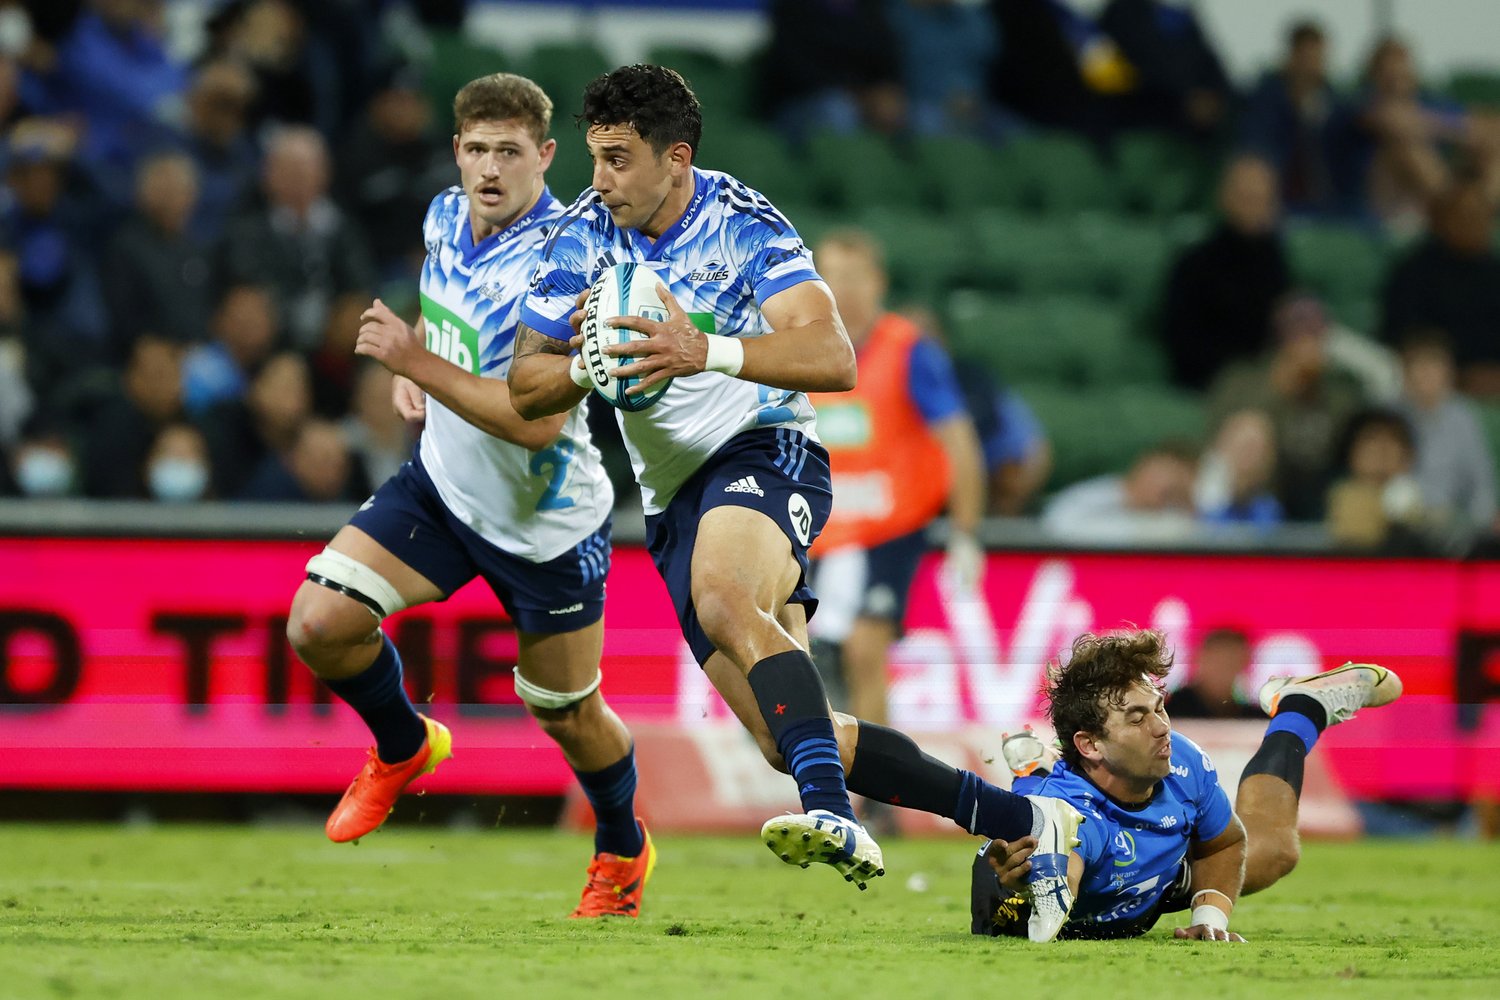 BLUES EXCITED FOR MAJOR CHALLENGE AGAINST BRUMBIES IN CANBERRA — Blues Rugby